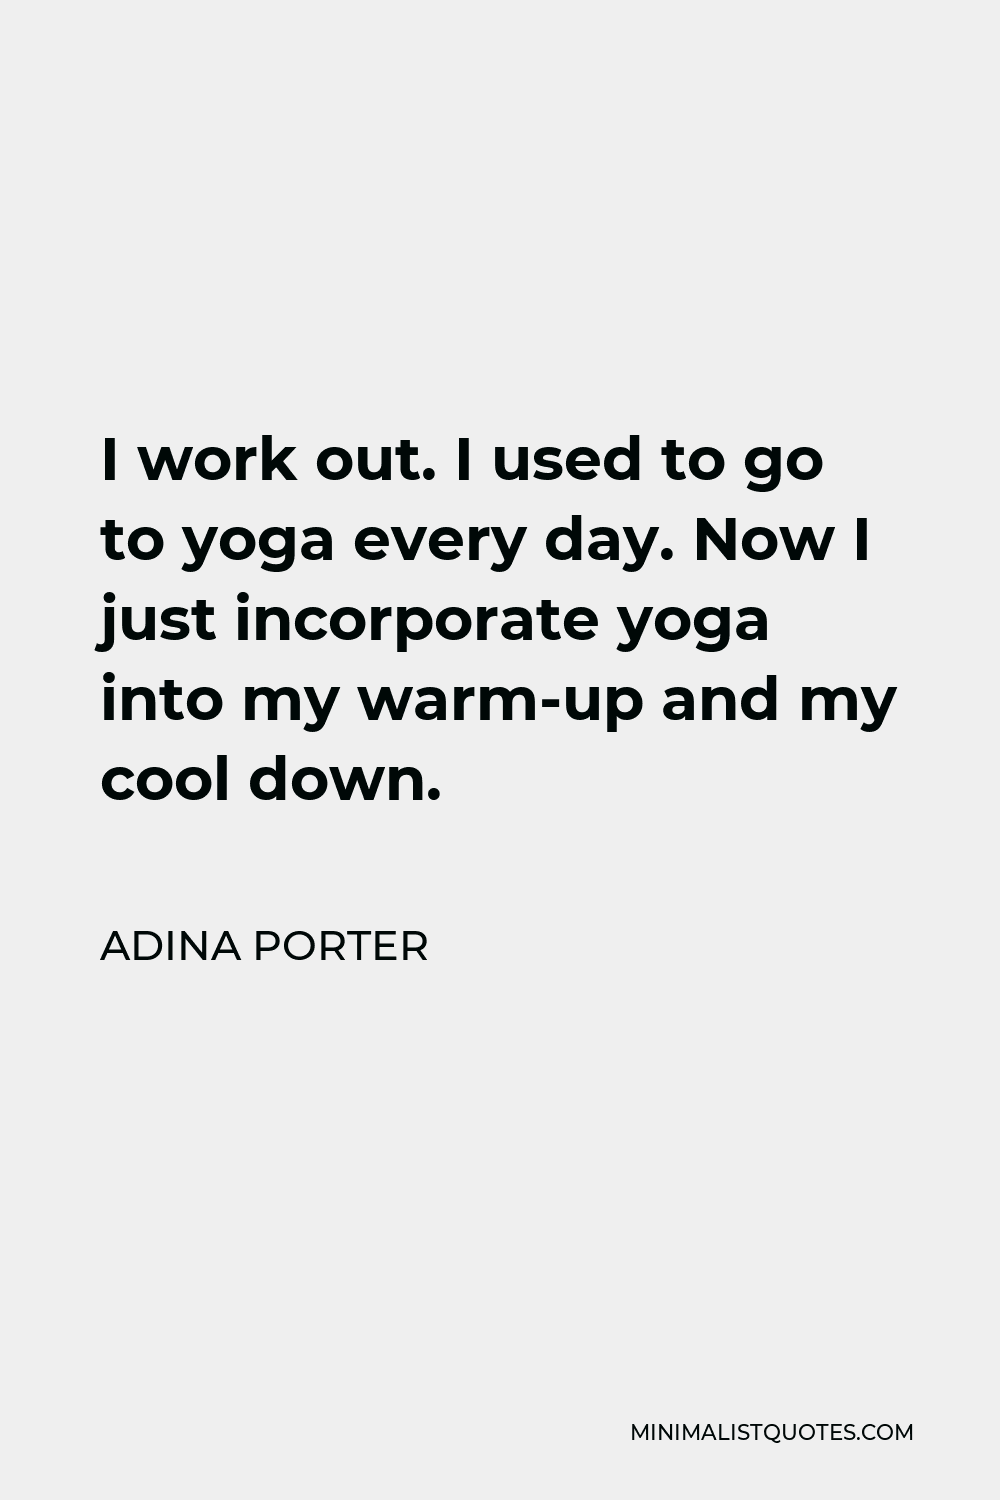 Adina Porter Quote - I work out. I used to go to yoga every day. Now I just incorporate yoga into my warm-up and my cool down.